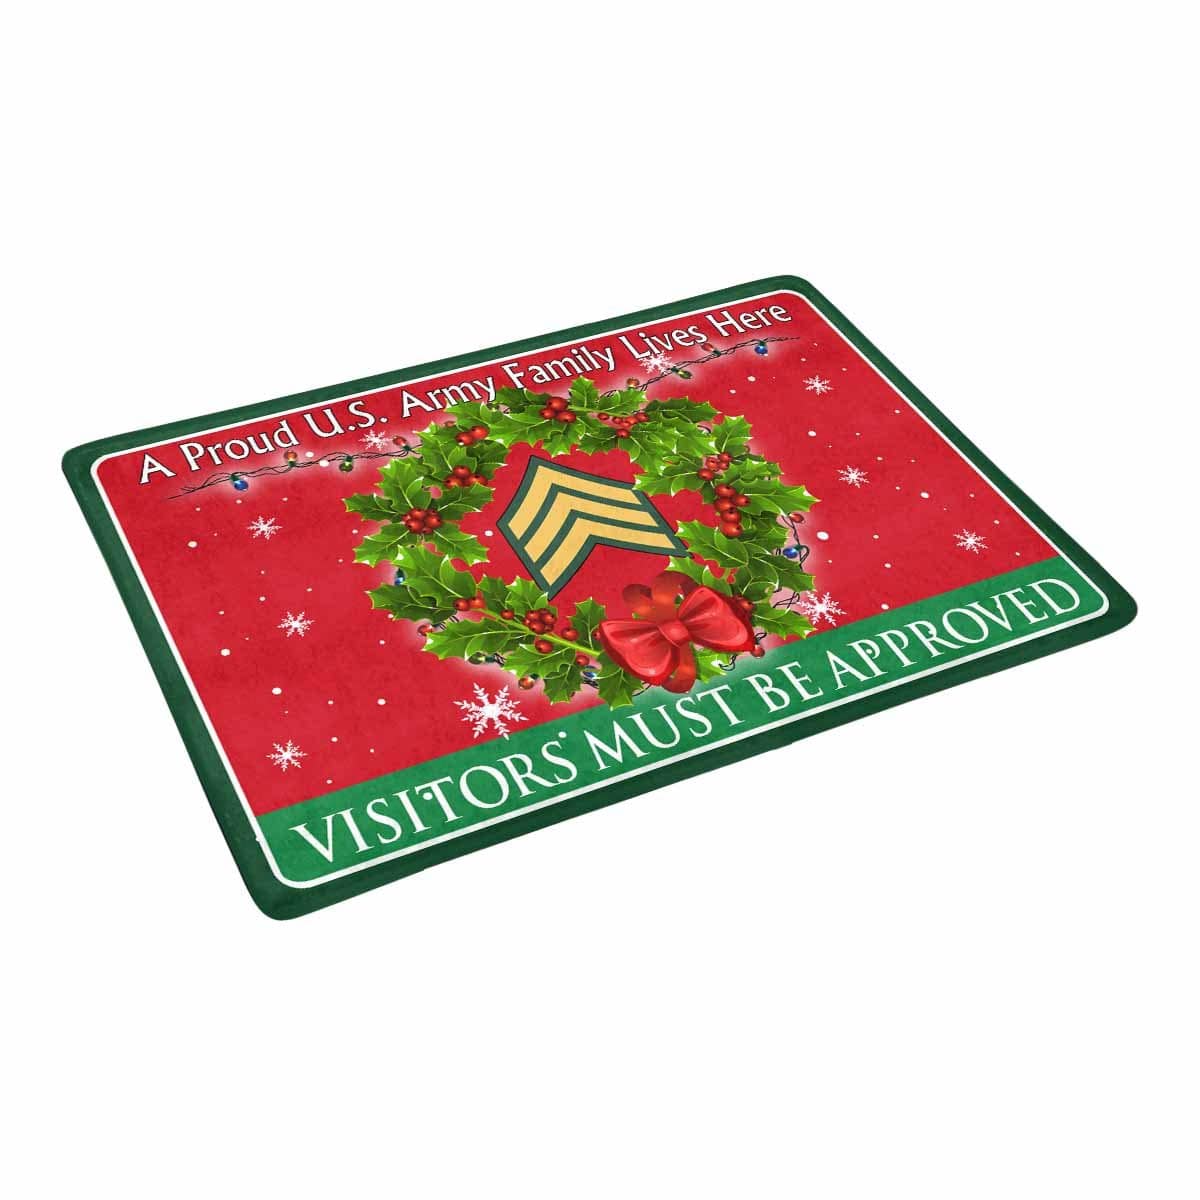 US Army E-5 Sergeant E5 SGT Noncommissioned Officer Ranks - Visitors must be approved Christmas Doormat-Doormat-Army-Ranks-Veterans Nation